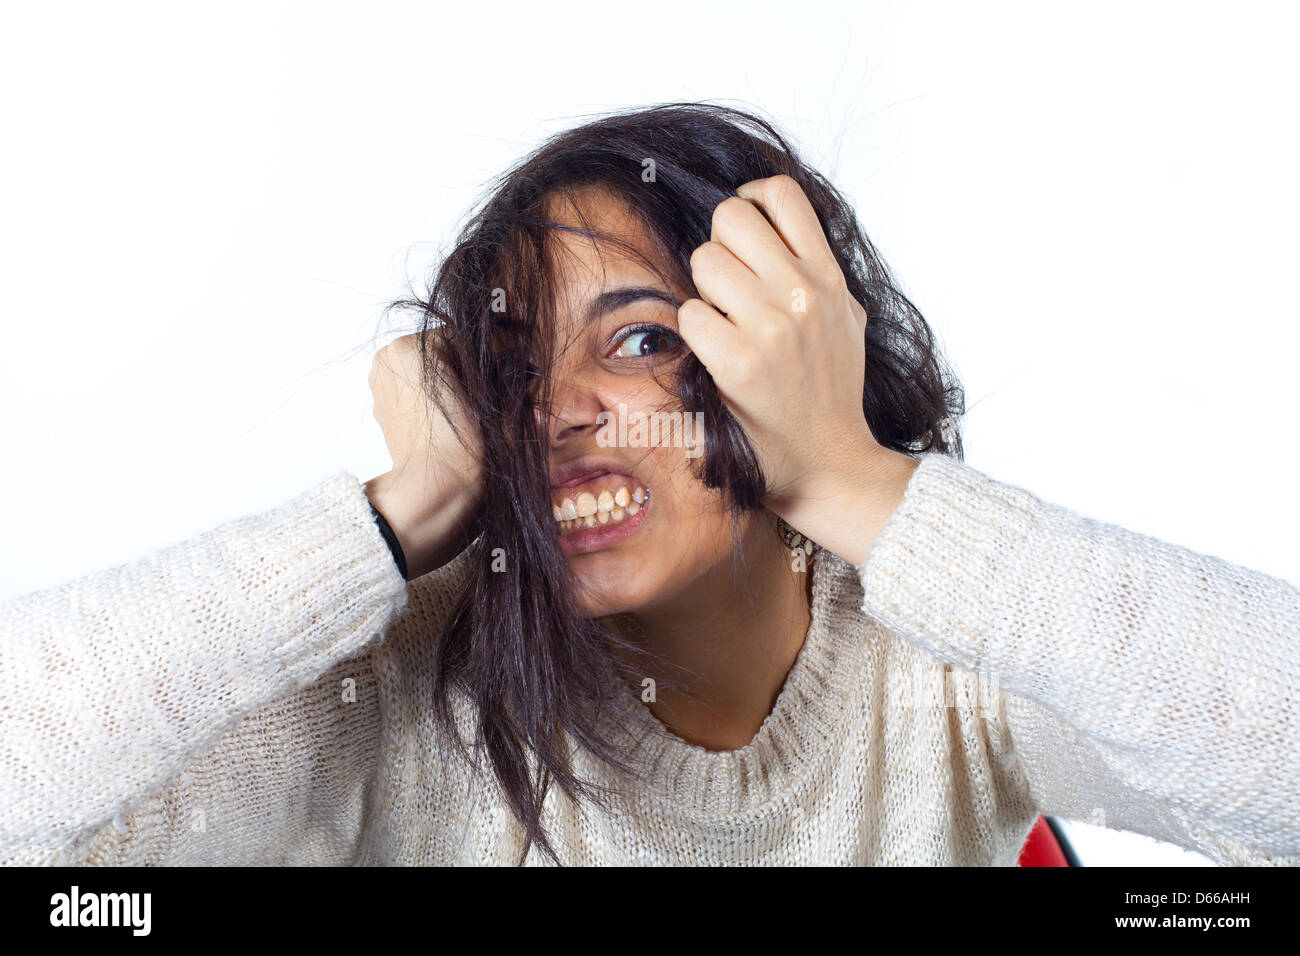 Hysterical woman expression with her hands on the head on a white isolated background Stock Photo